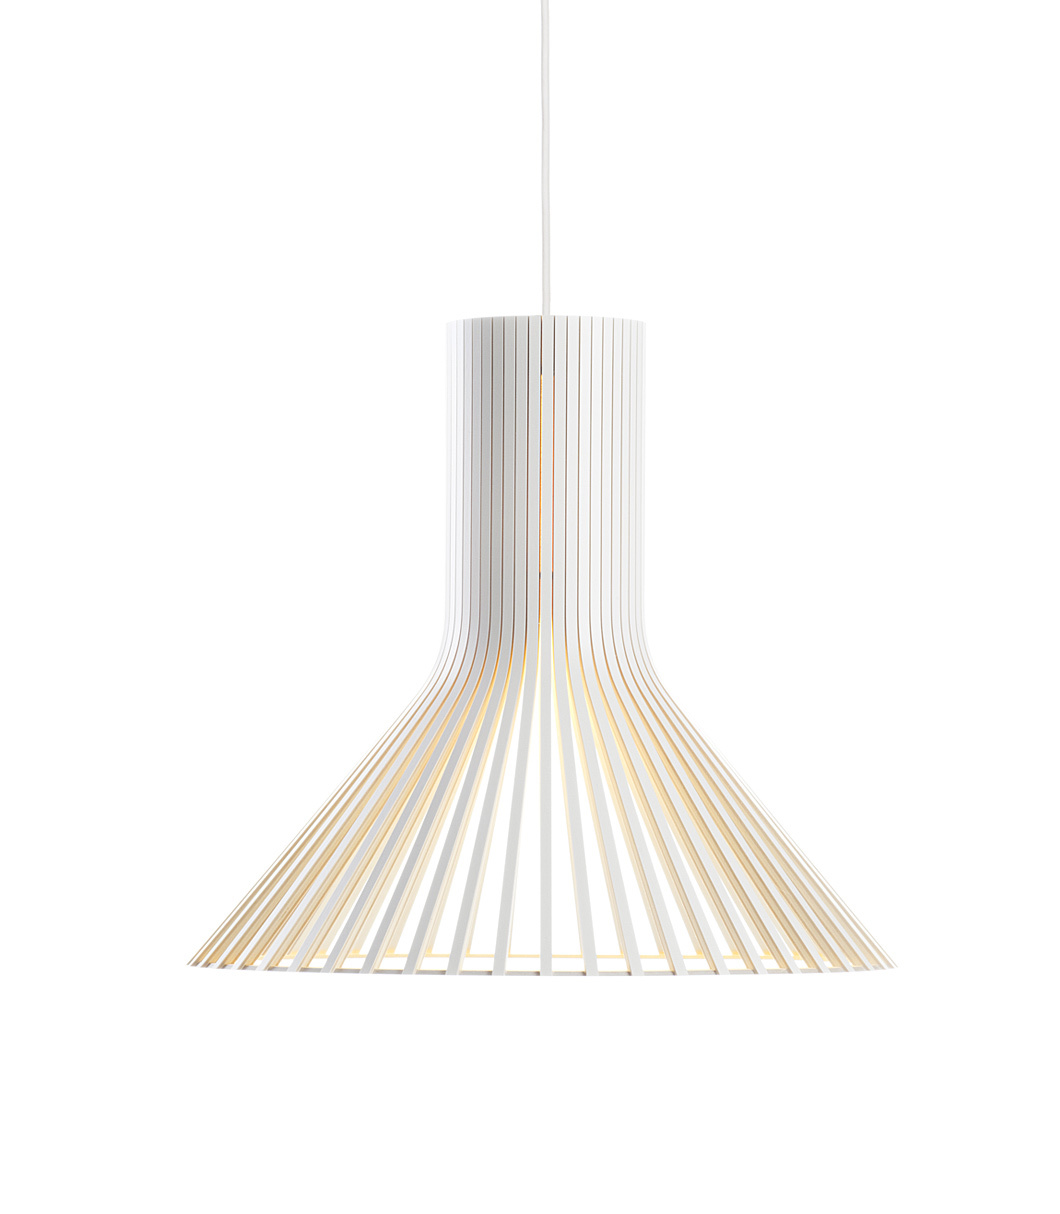 Puncto 4203 pendant lamp is available in white laminated